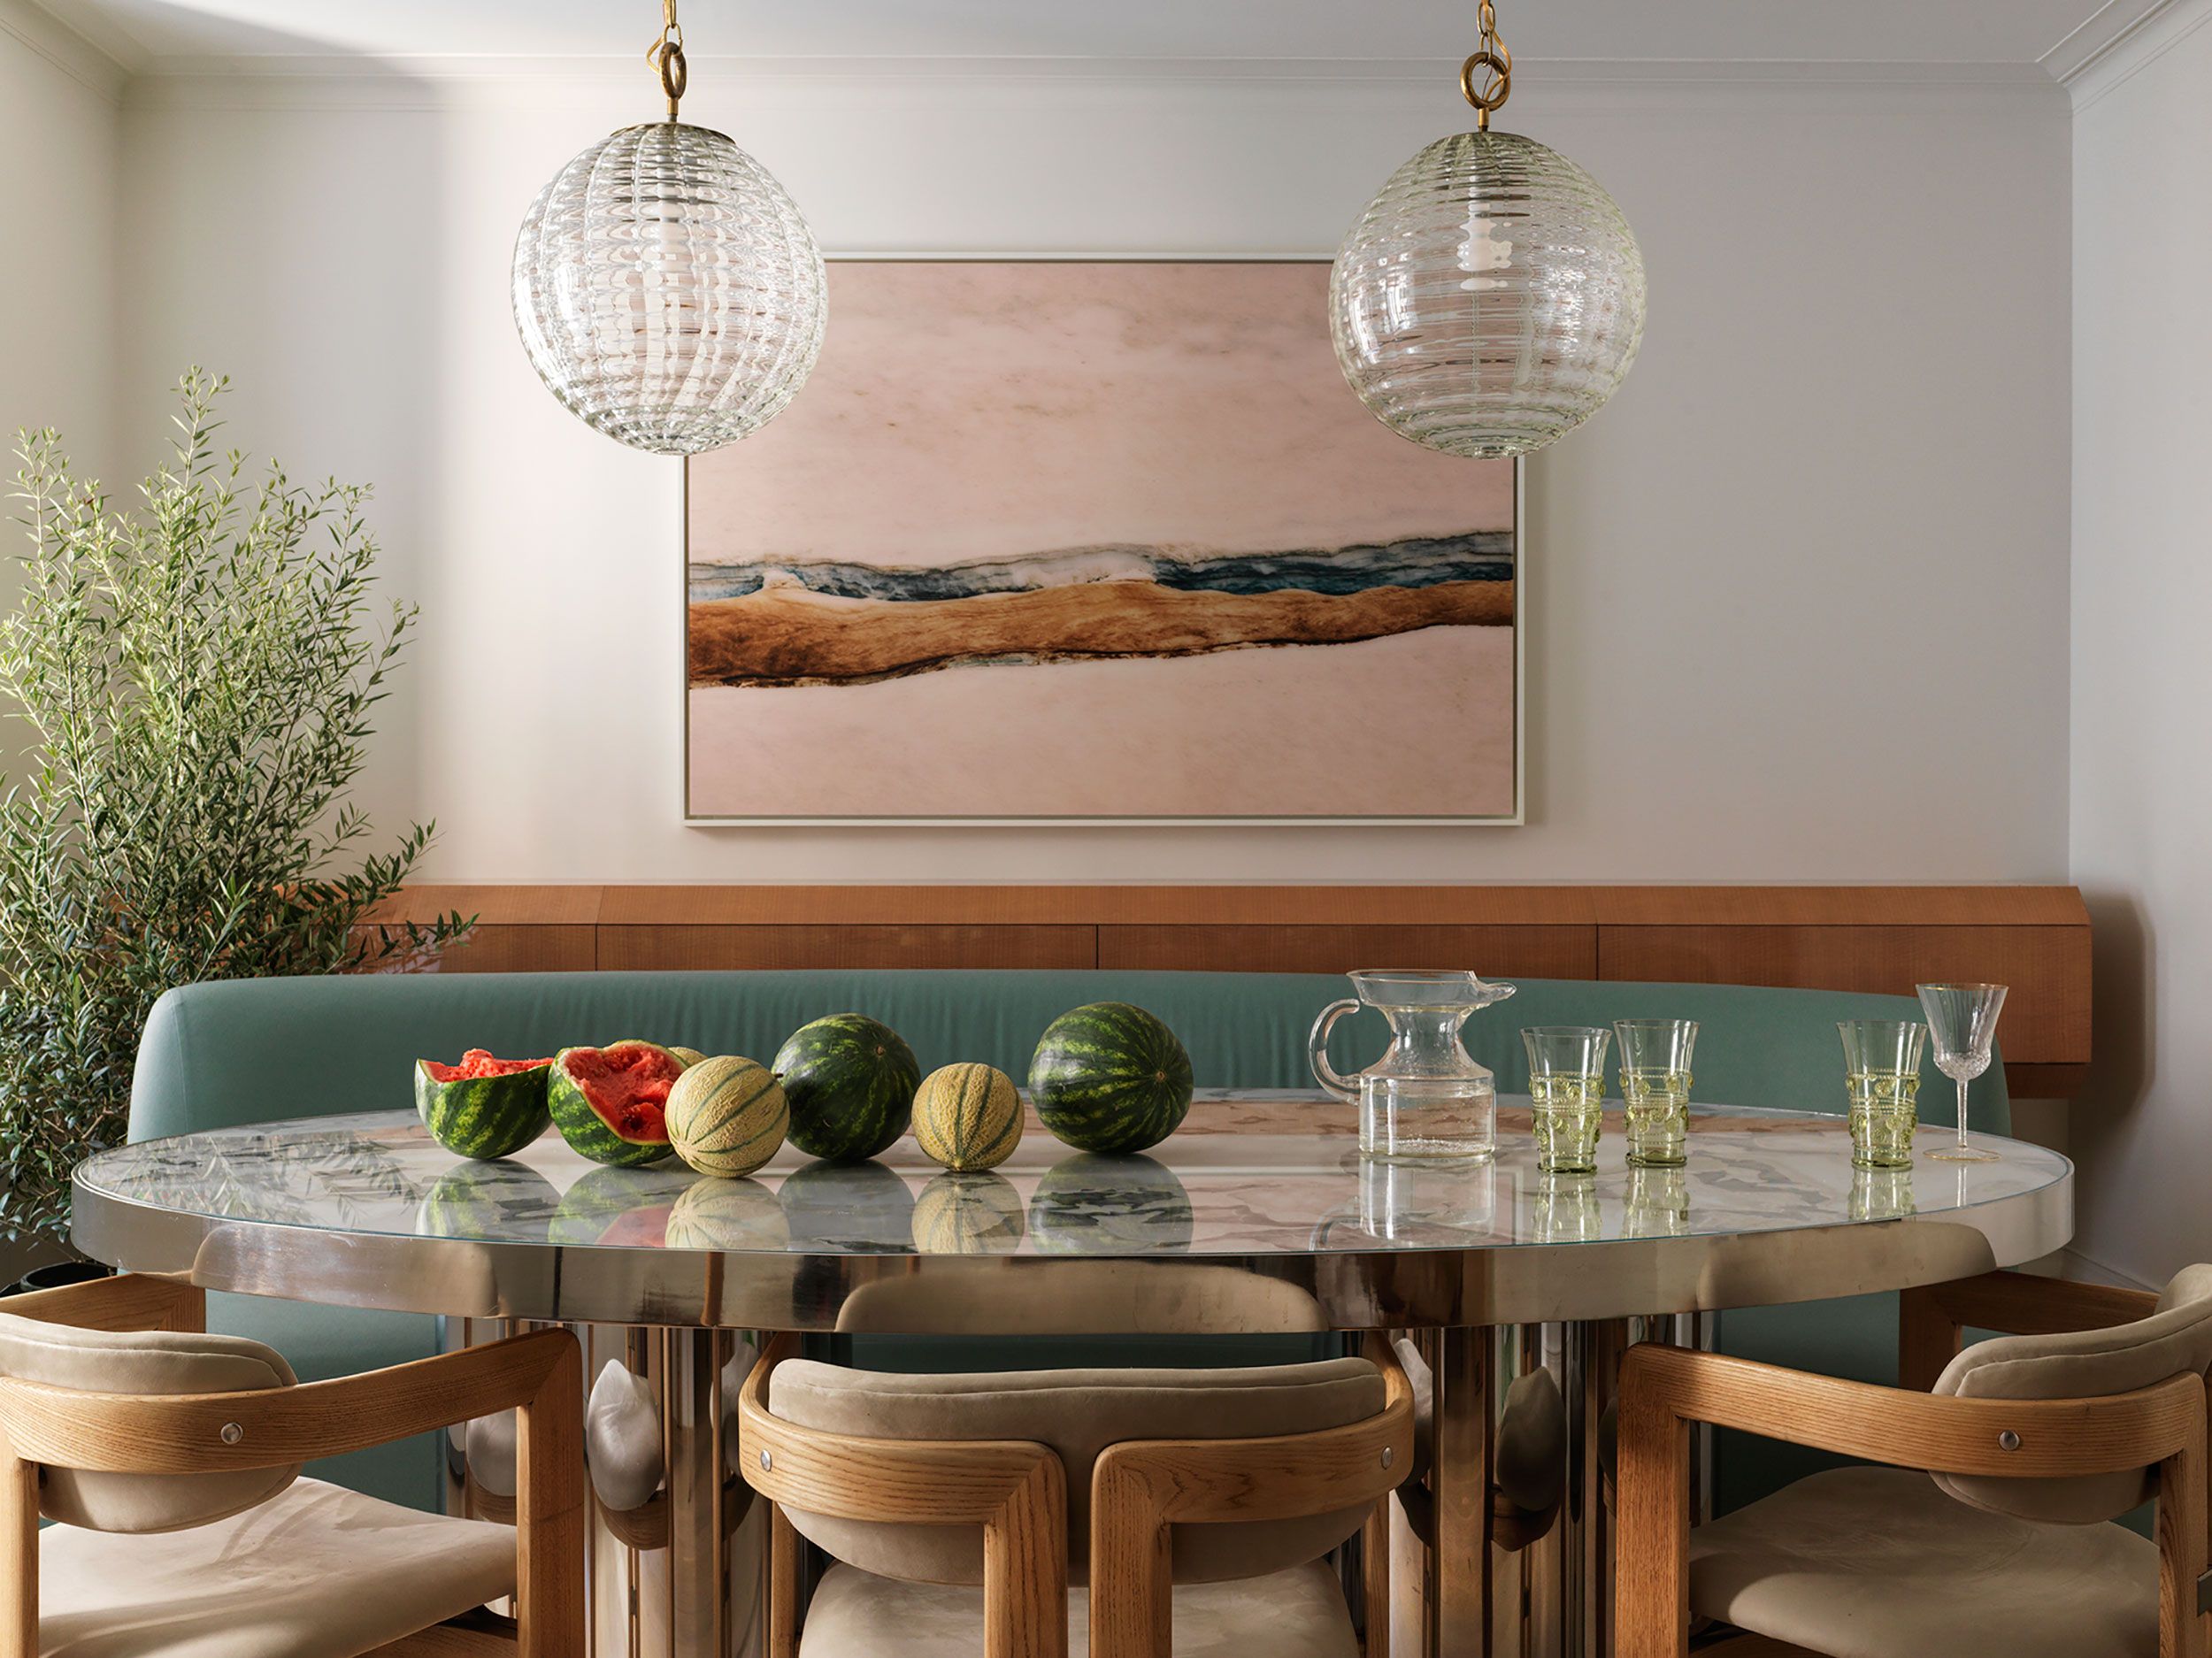 decorating ideas for dining room